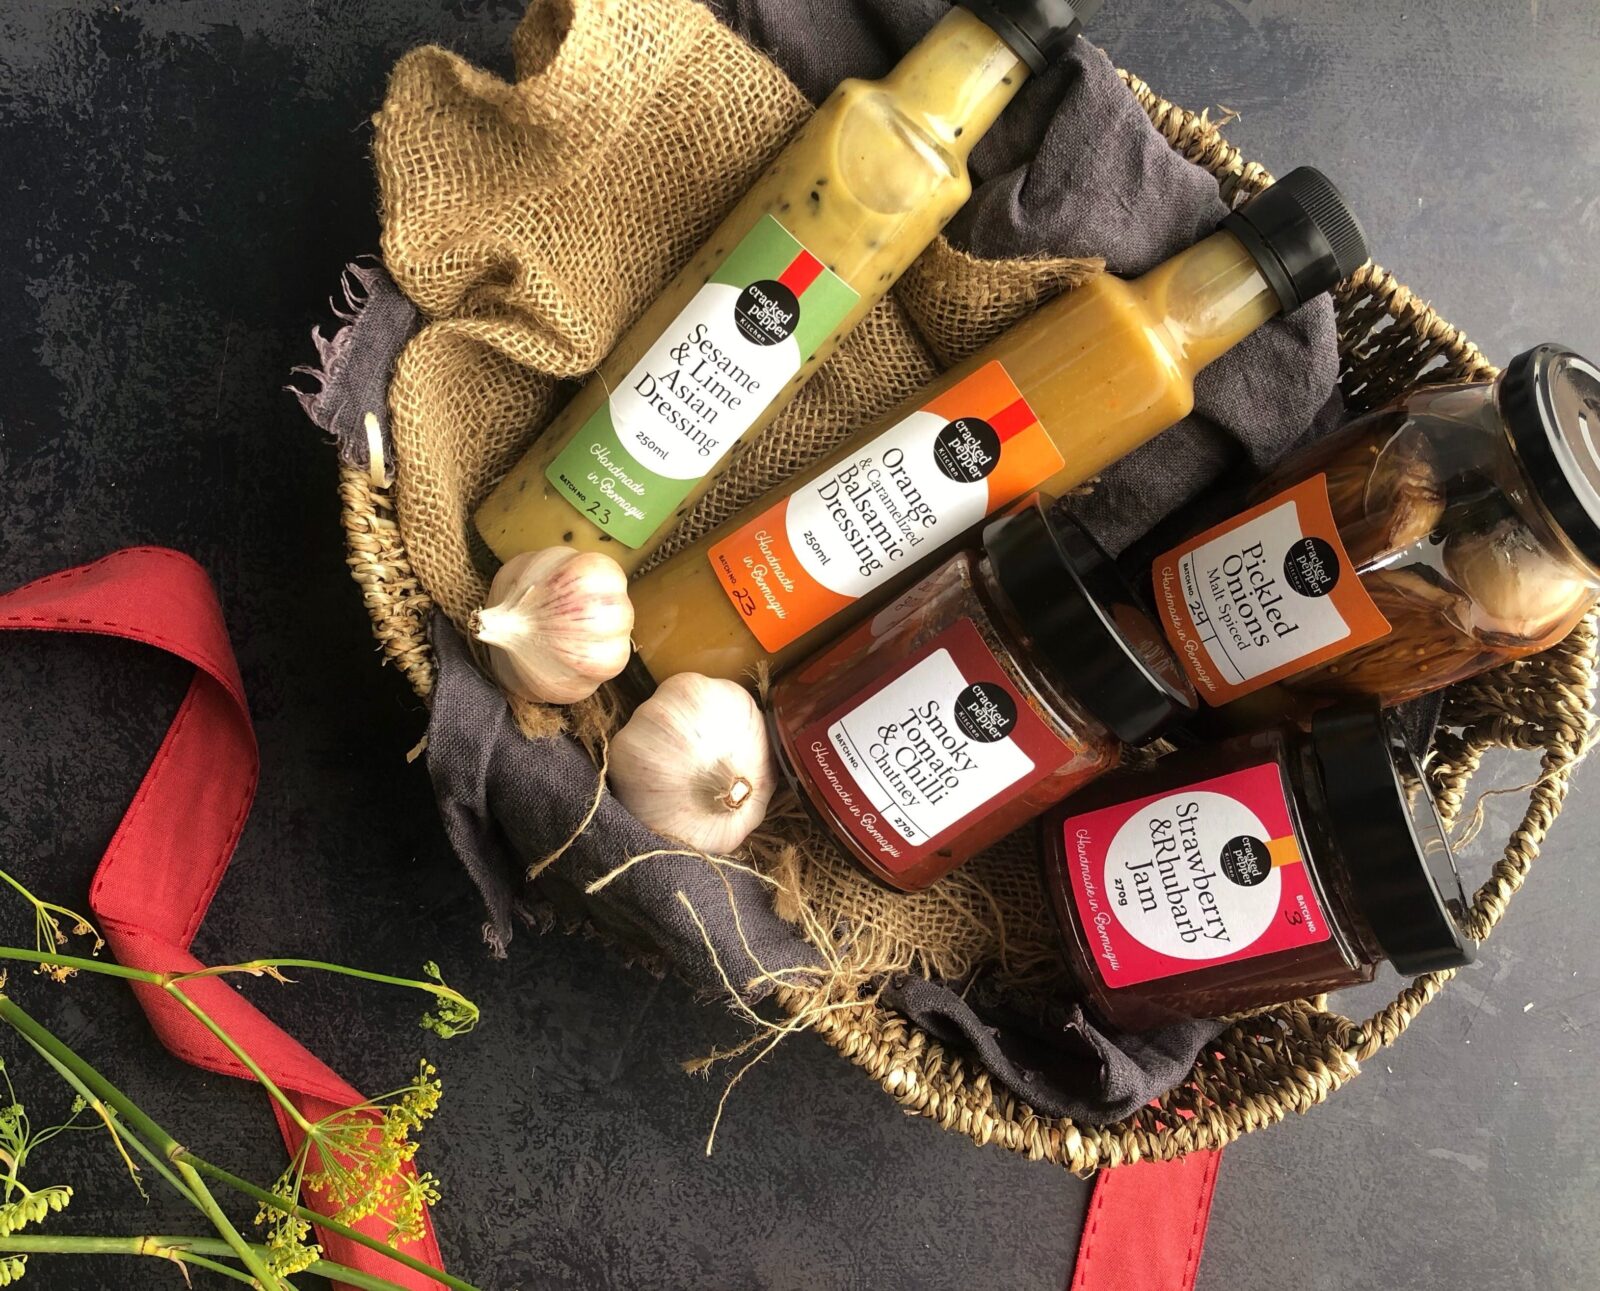 Artisan salad dressings, pickles and chutneys, lovingly made in Bermagui , NSW